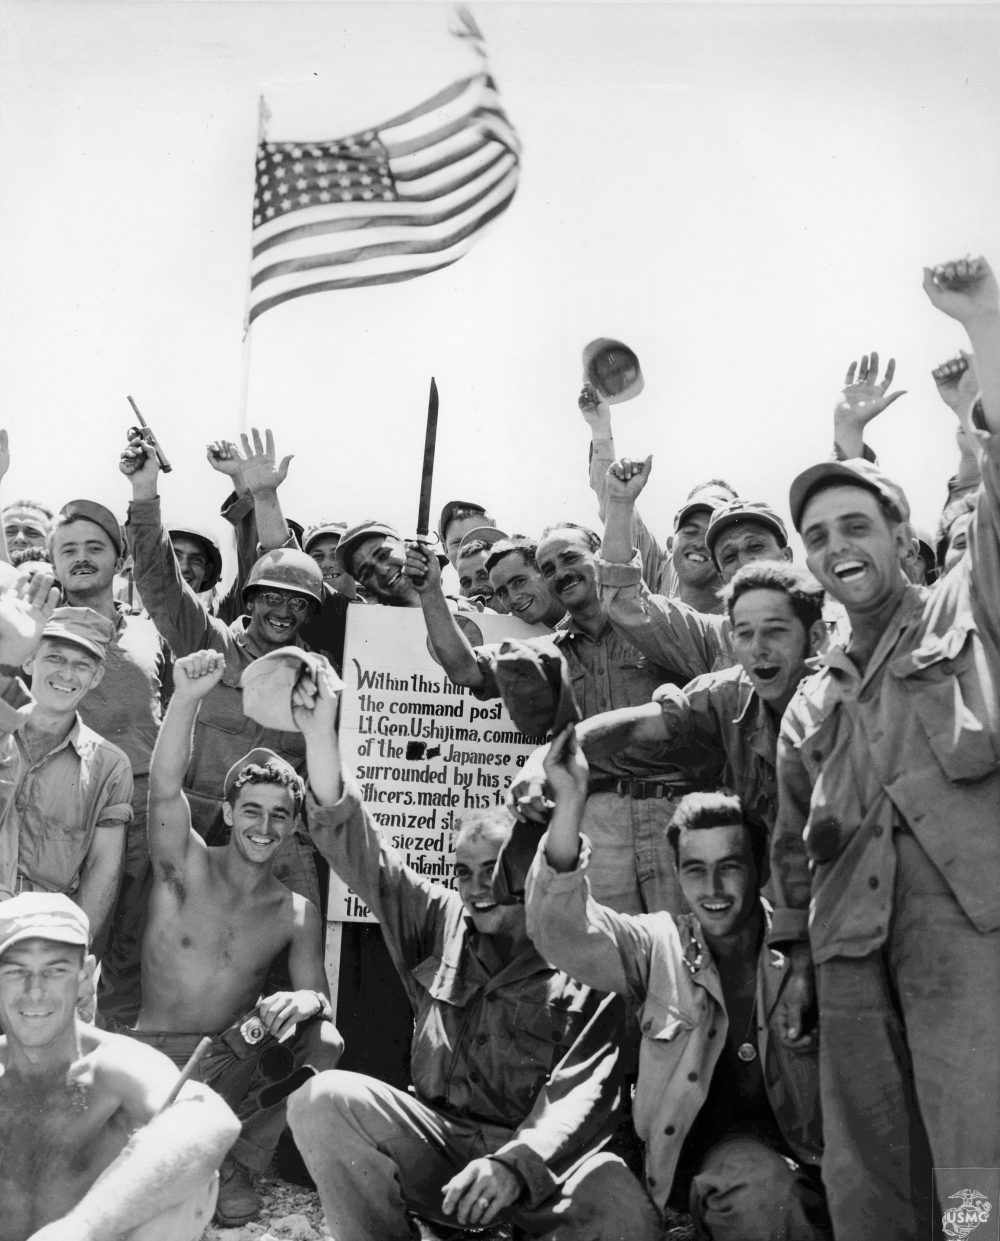 US Marines and US Army soldiers celebrating the capture of Hill 89, Okinawa, Japan, 27 Jun 1945; the hill was captured by US 7th Inf Div on 21 Jun 1945. (US Marine Corps photo)